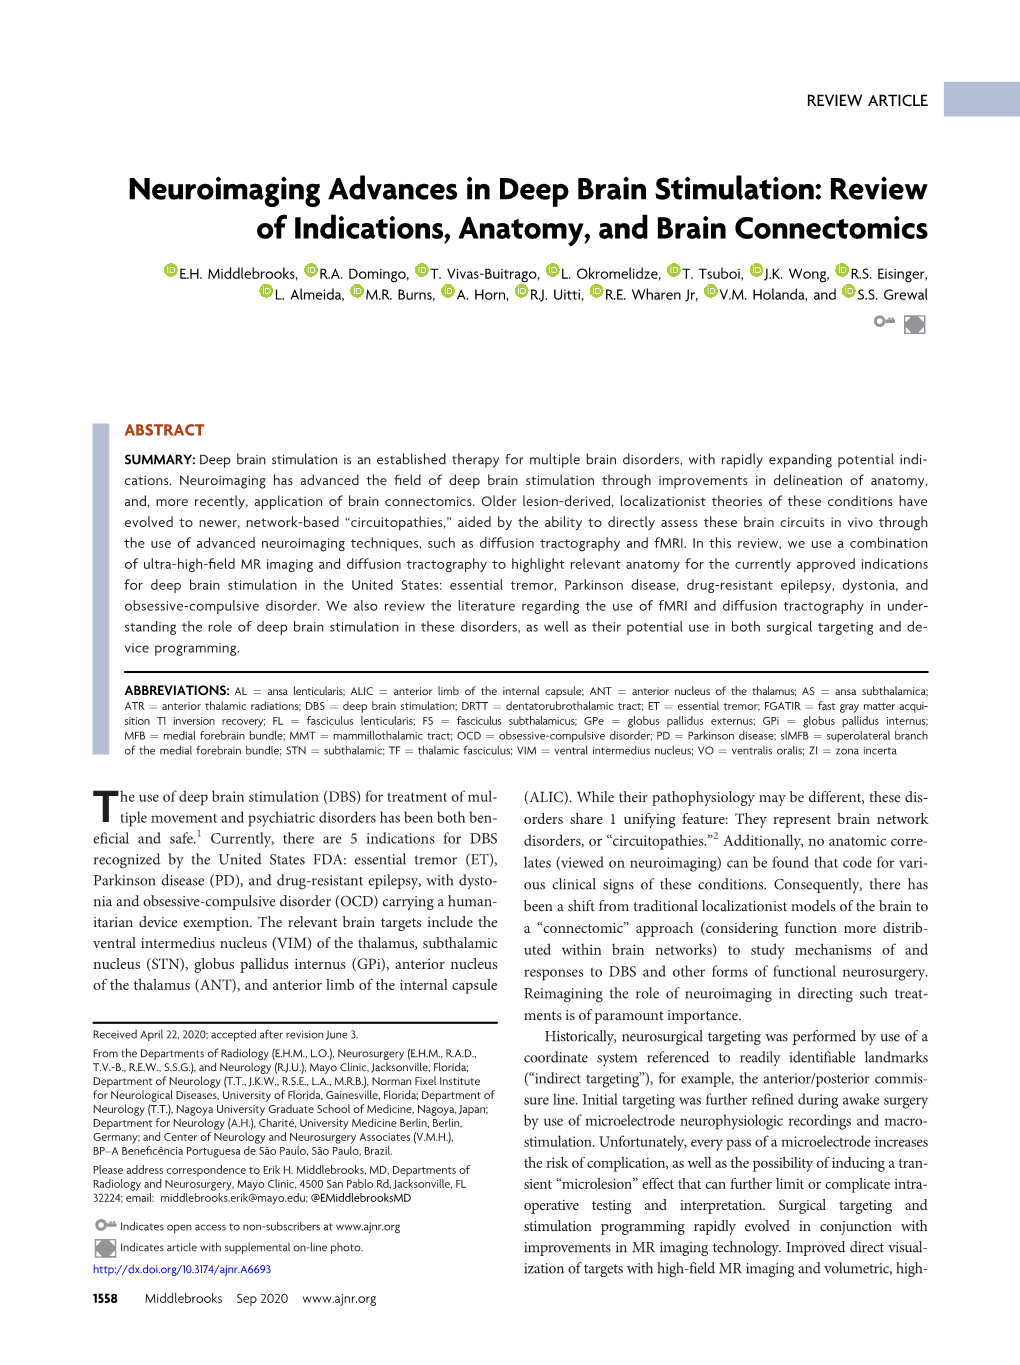 Neuroimaging Advances in Deep Brain Stimulation: Review of Indications, Anatomy, and Brain Connectomics